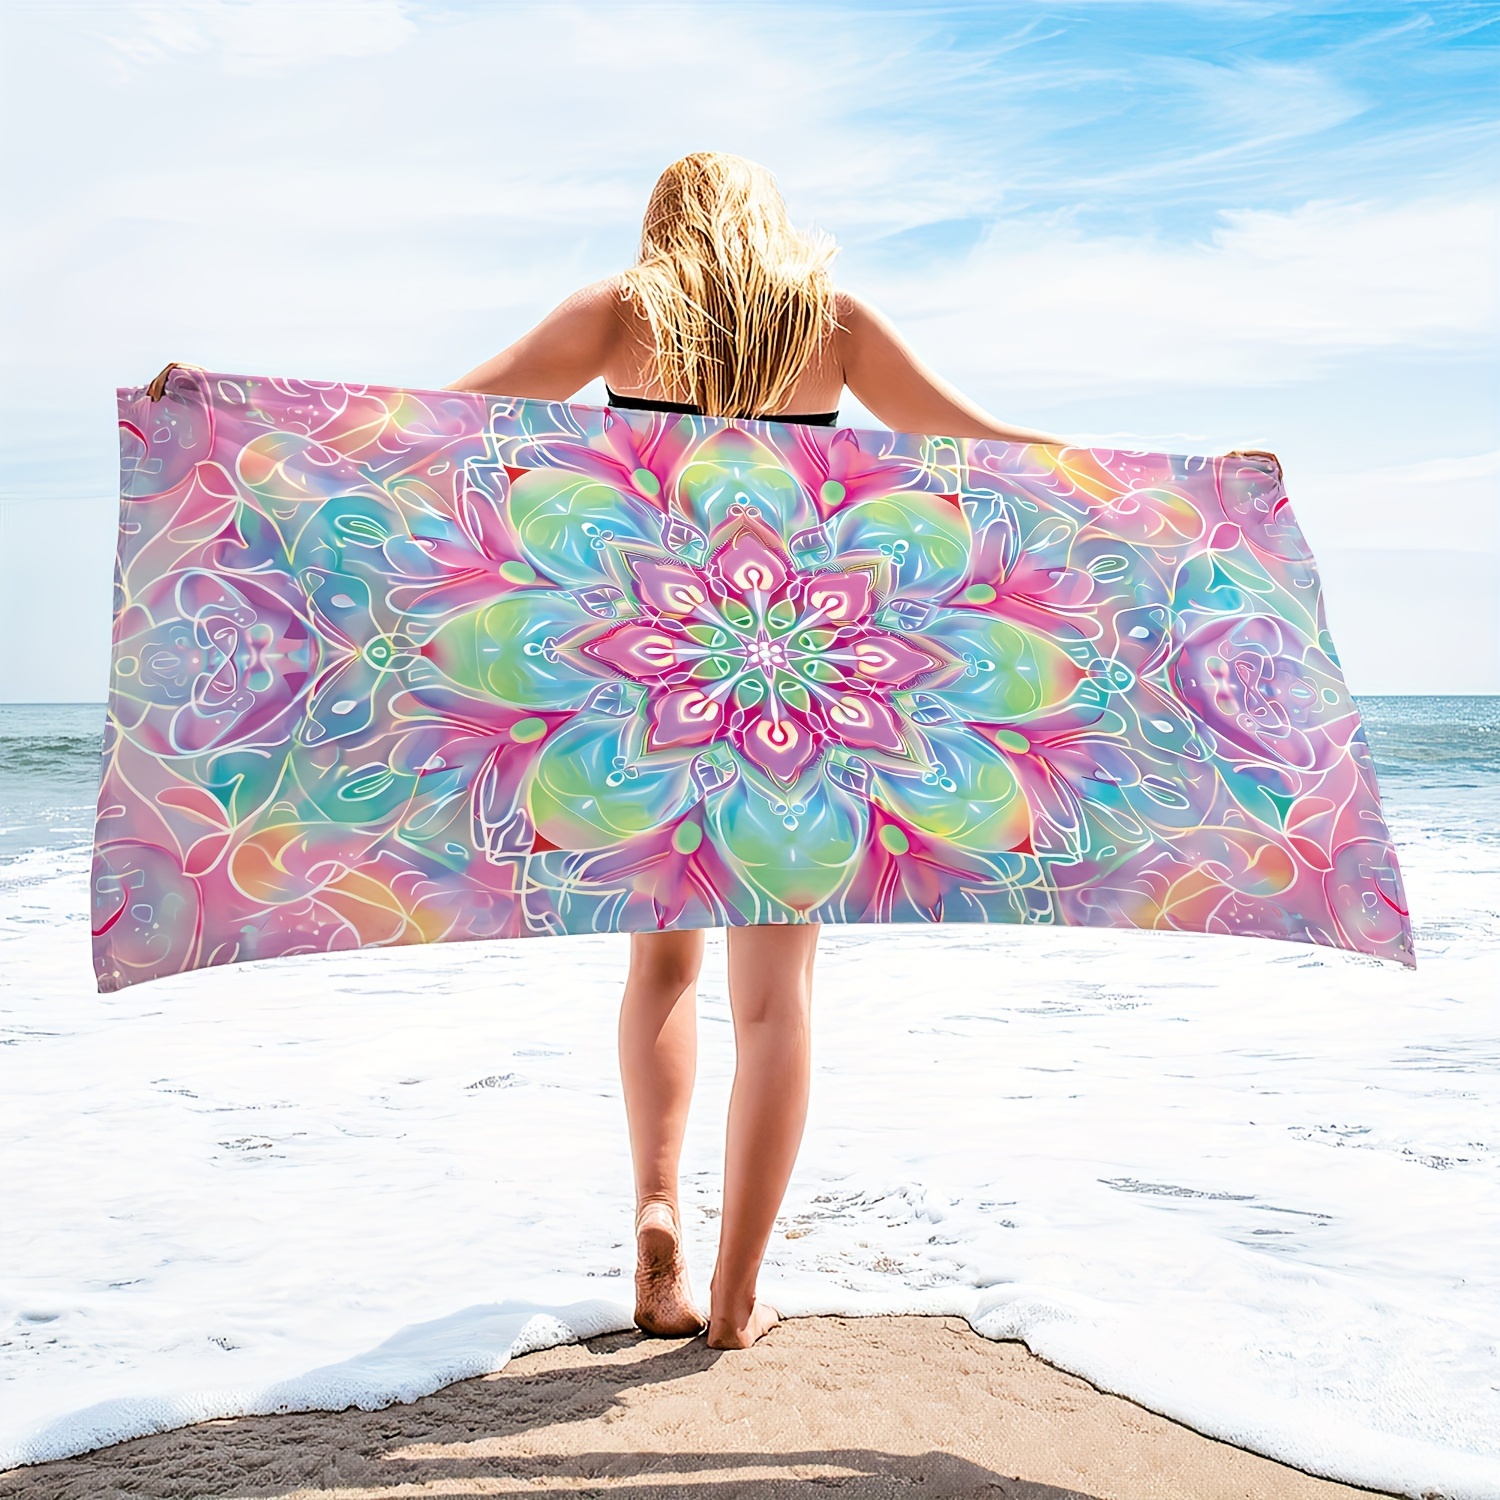 

1pc Mandala Floral Microfiber Beach Towel, Psychedelic Abstract Bohemian Oversized Beach Towel, Lightweight Sandproof Quick Drying Thin Absorbent Towel, Swimming Pool Camping Beach Accessory